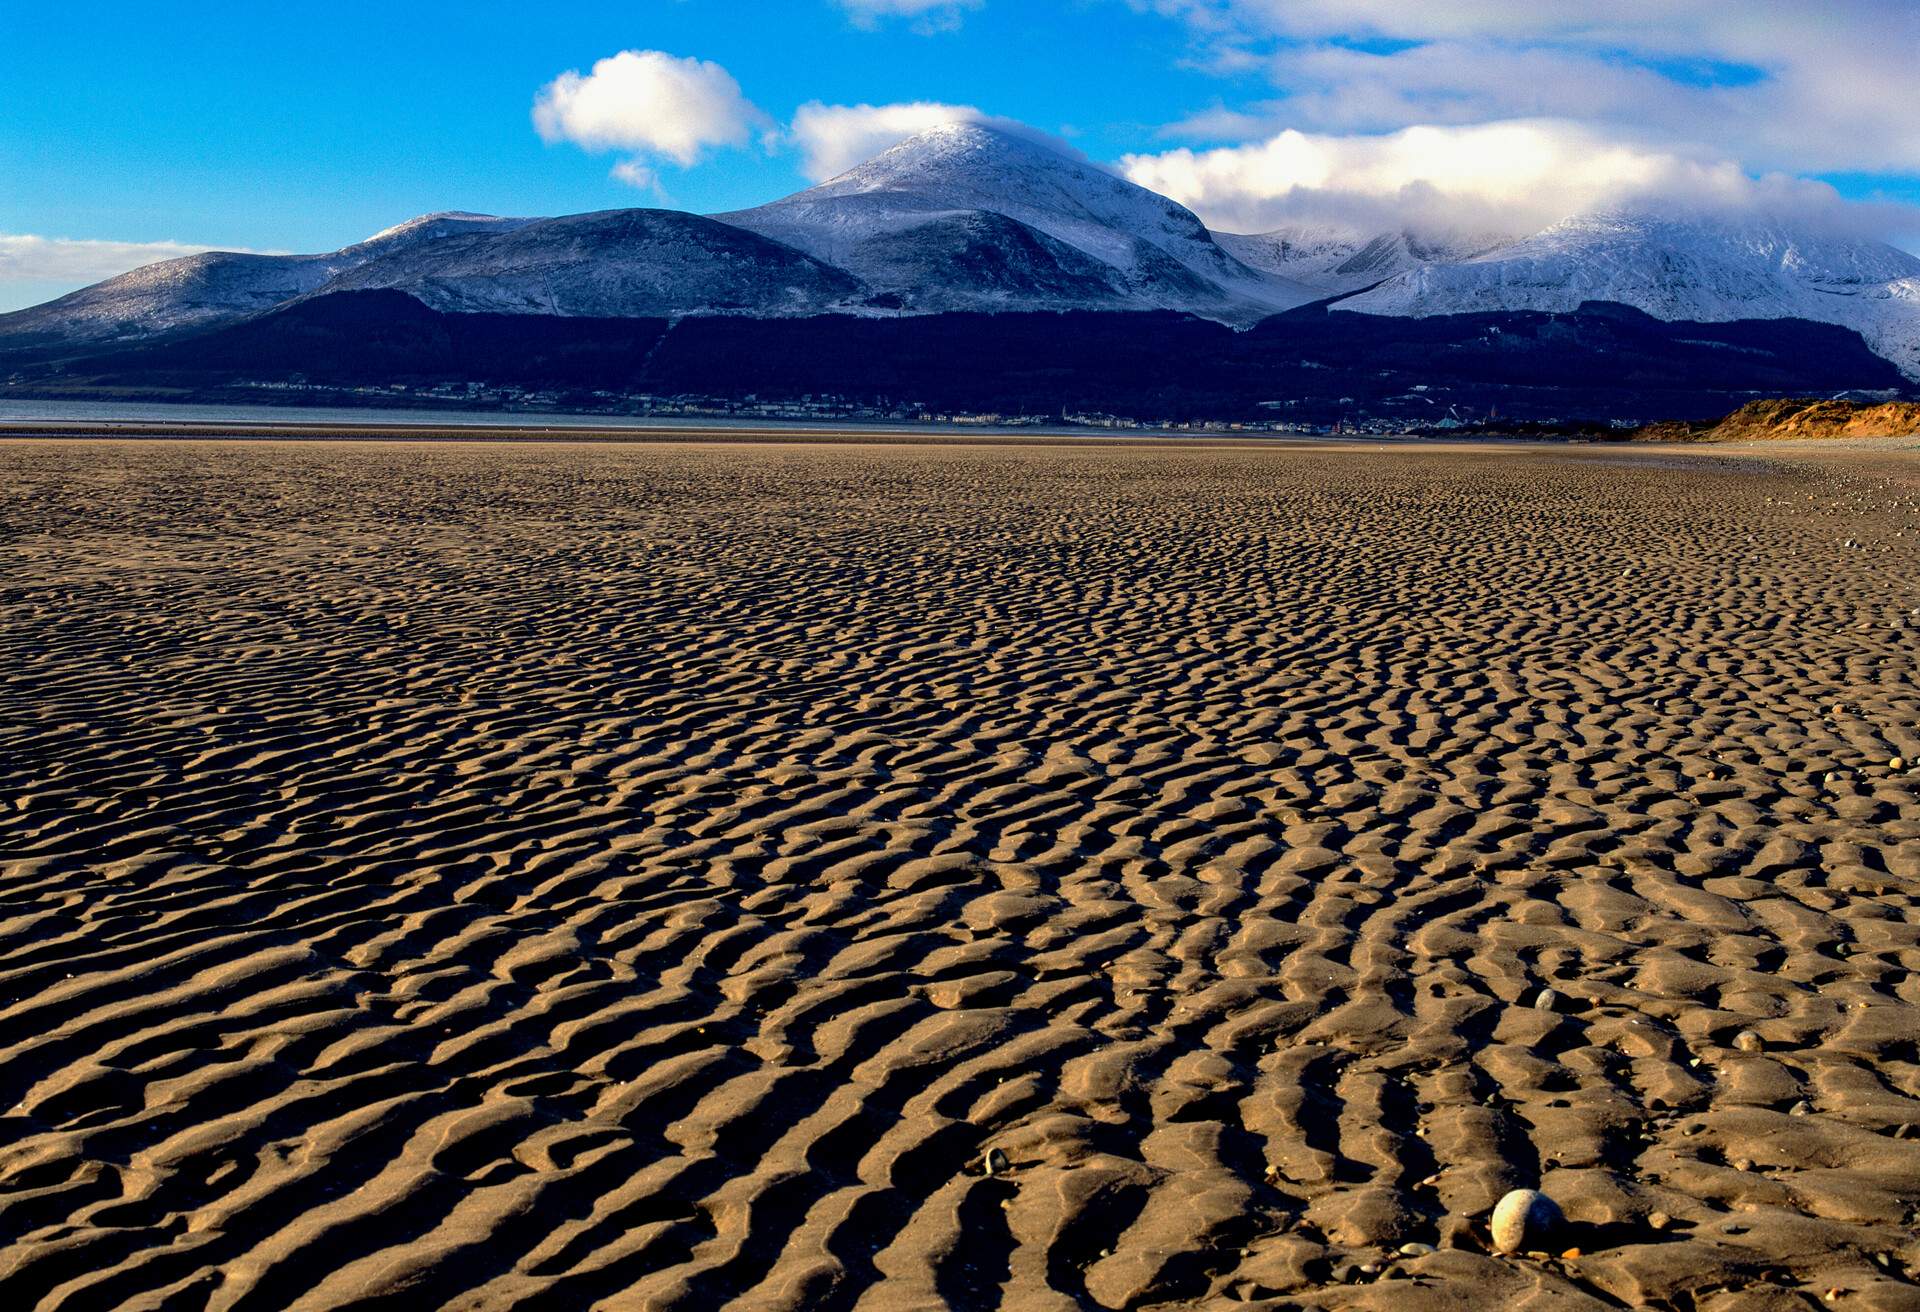 Ripples in the sand on Murlough Beach, Newcastle, County Down, Northern Ireland. In the background the Mourne Mountains have a light covering of snow